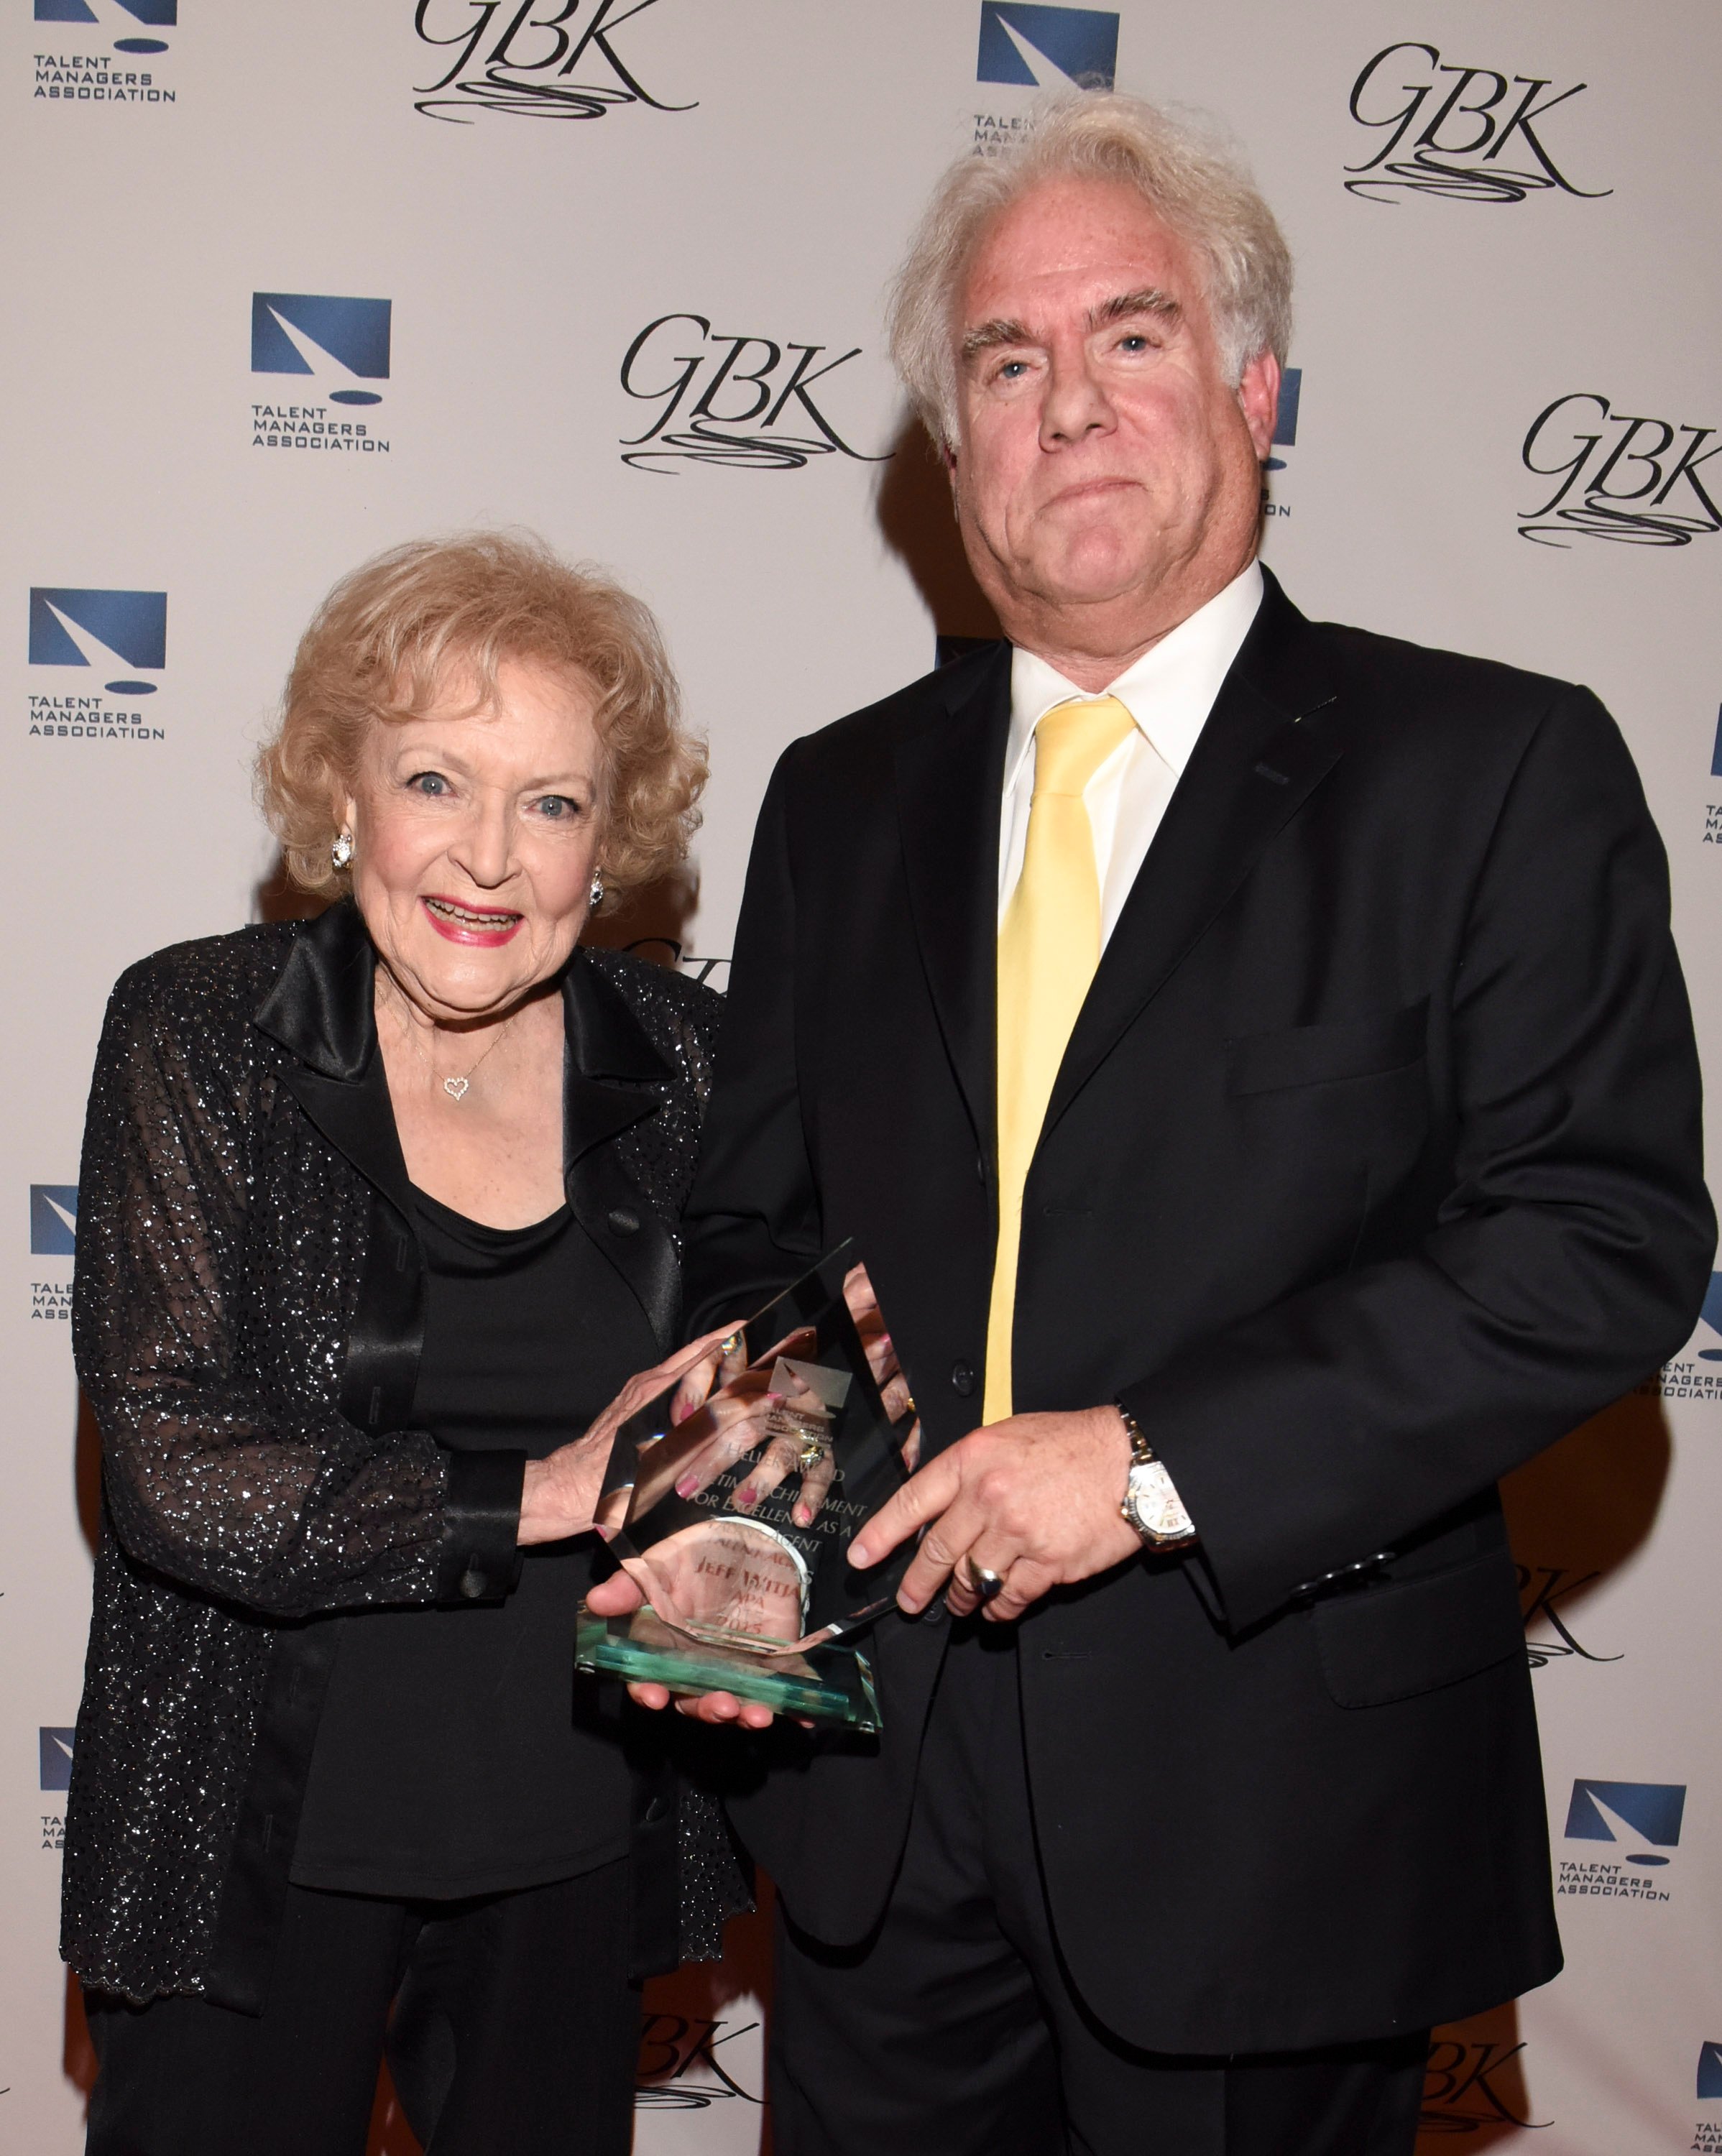 Betty White and her agent Jeff Witjas holding the actor's award at The TMA Heller Awards